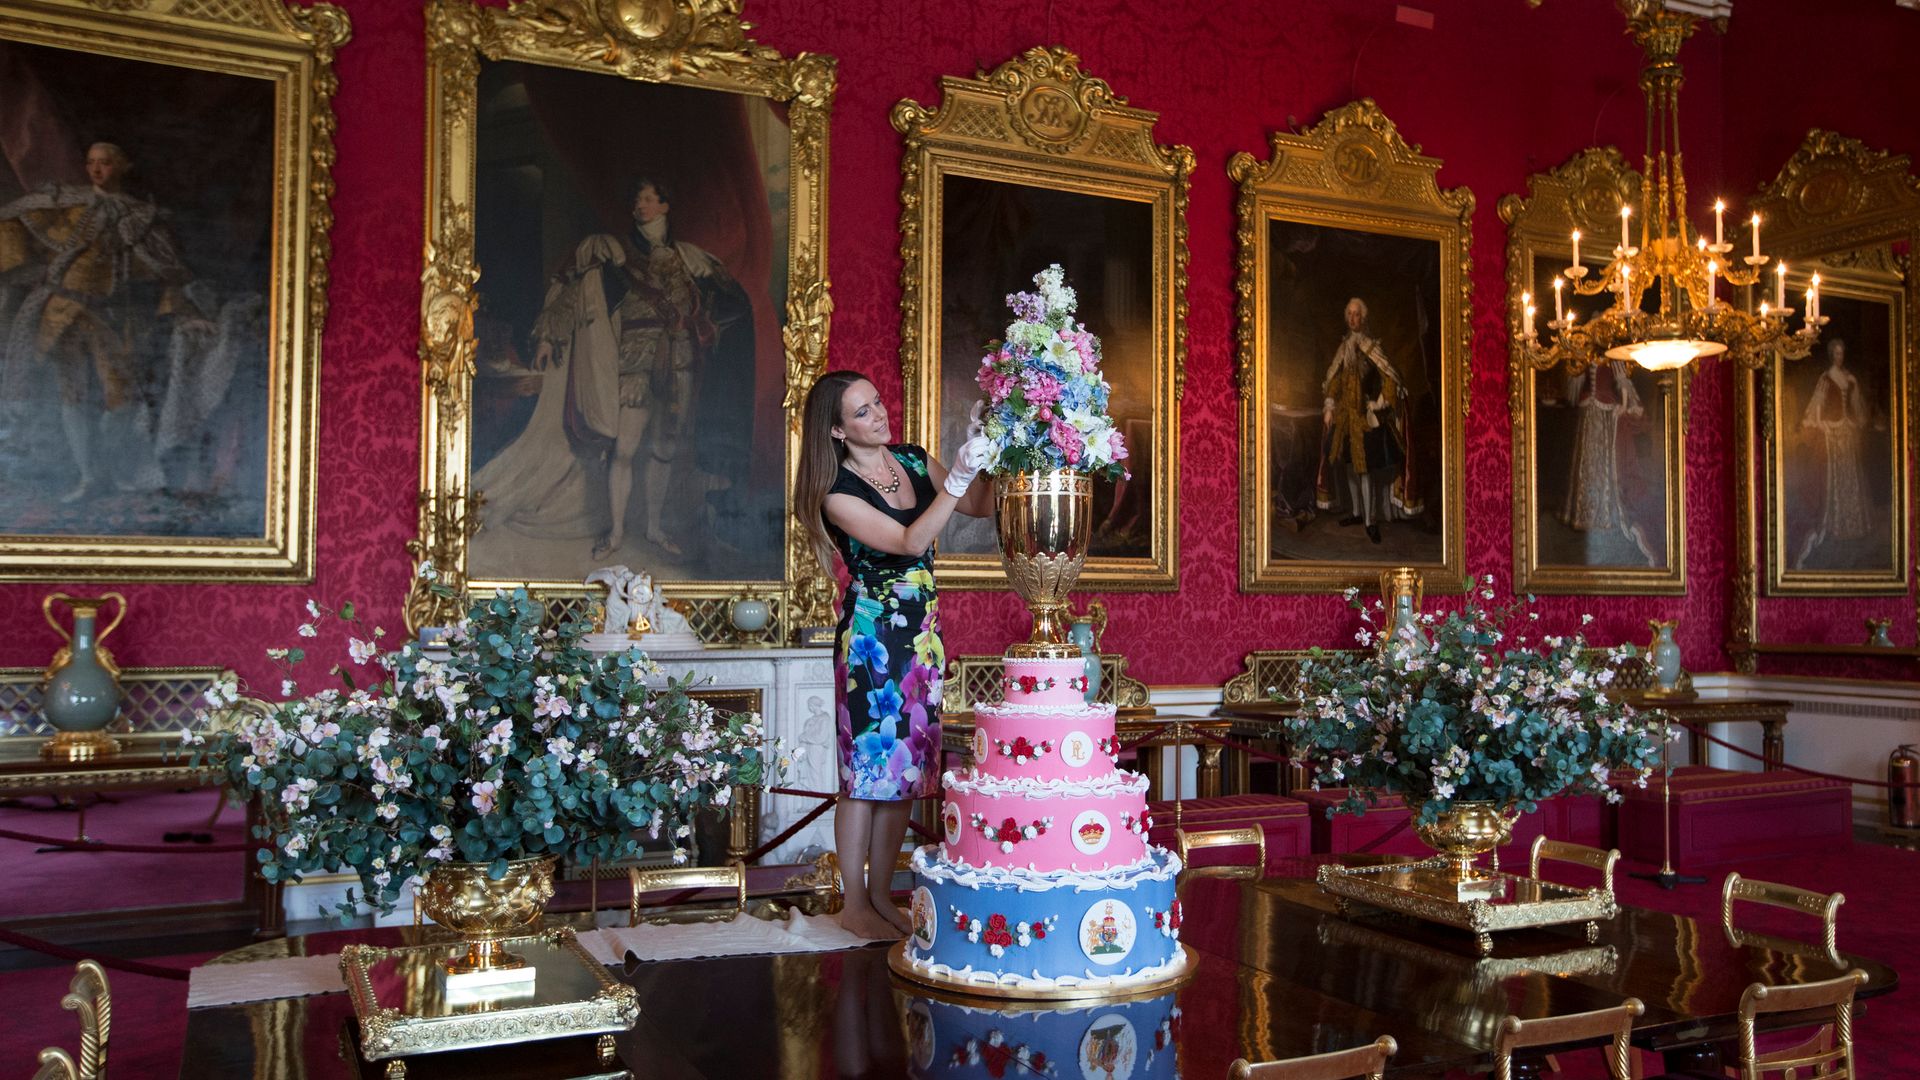 A woman decorating a cake inside the State Dining Room